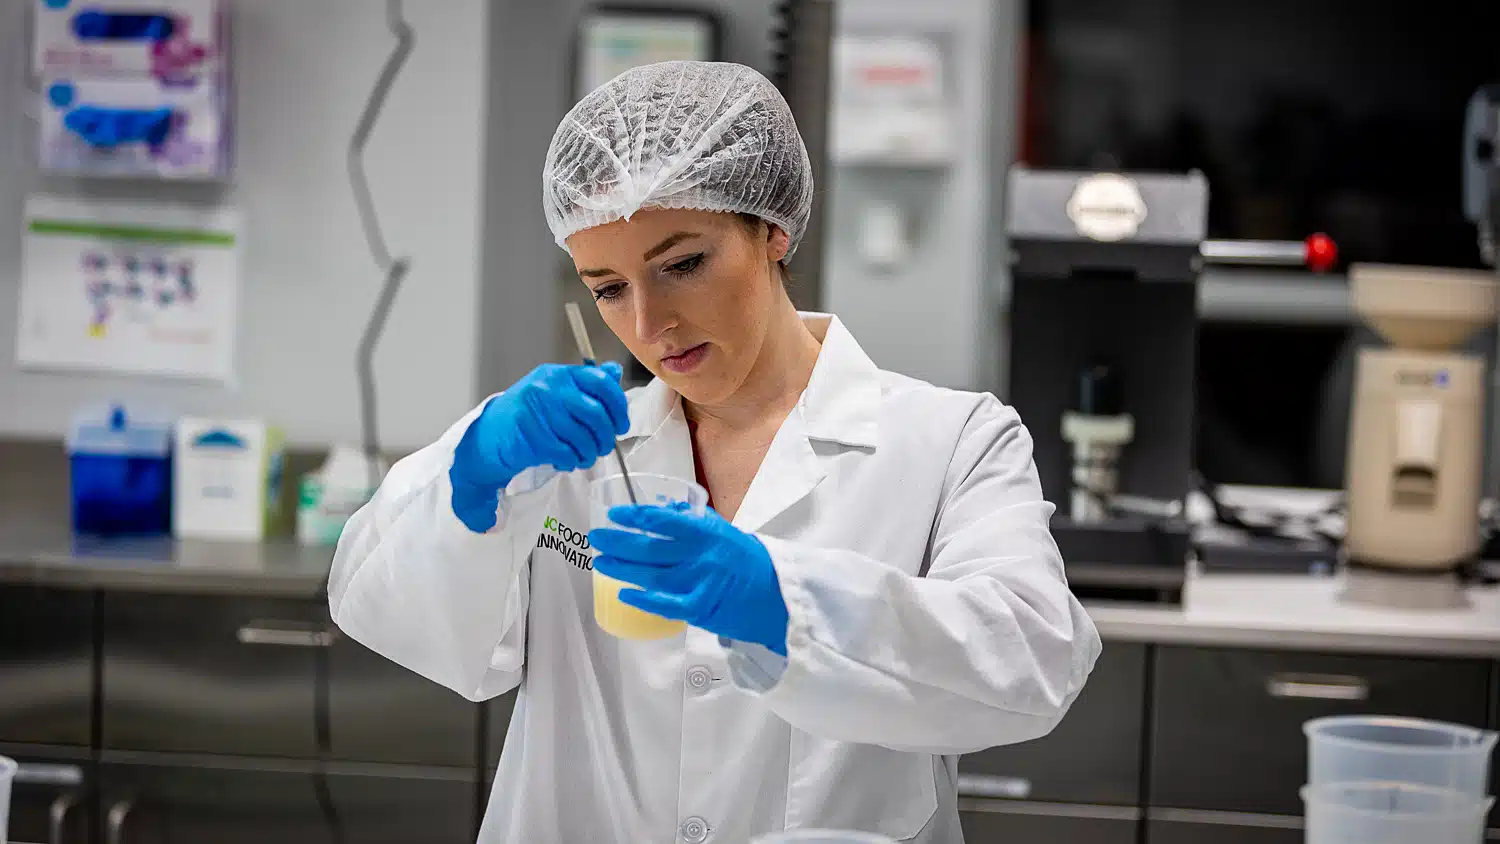 Food scientist Chloe Brubaker with the North Carolina Food Innovation Lab hydrates a protein for use in a food formulation.